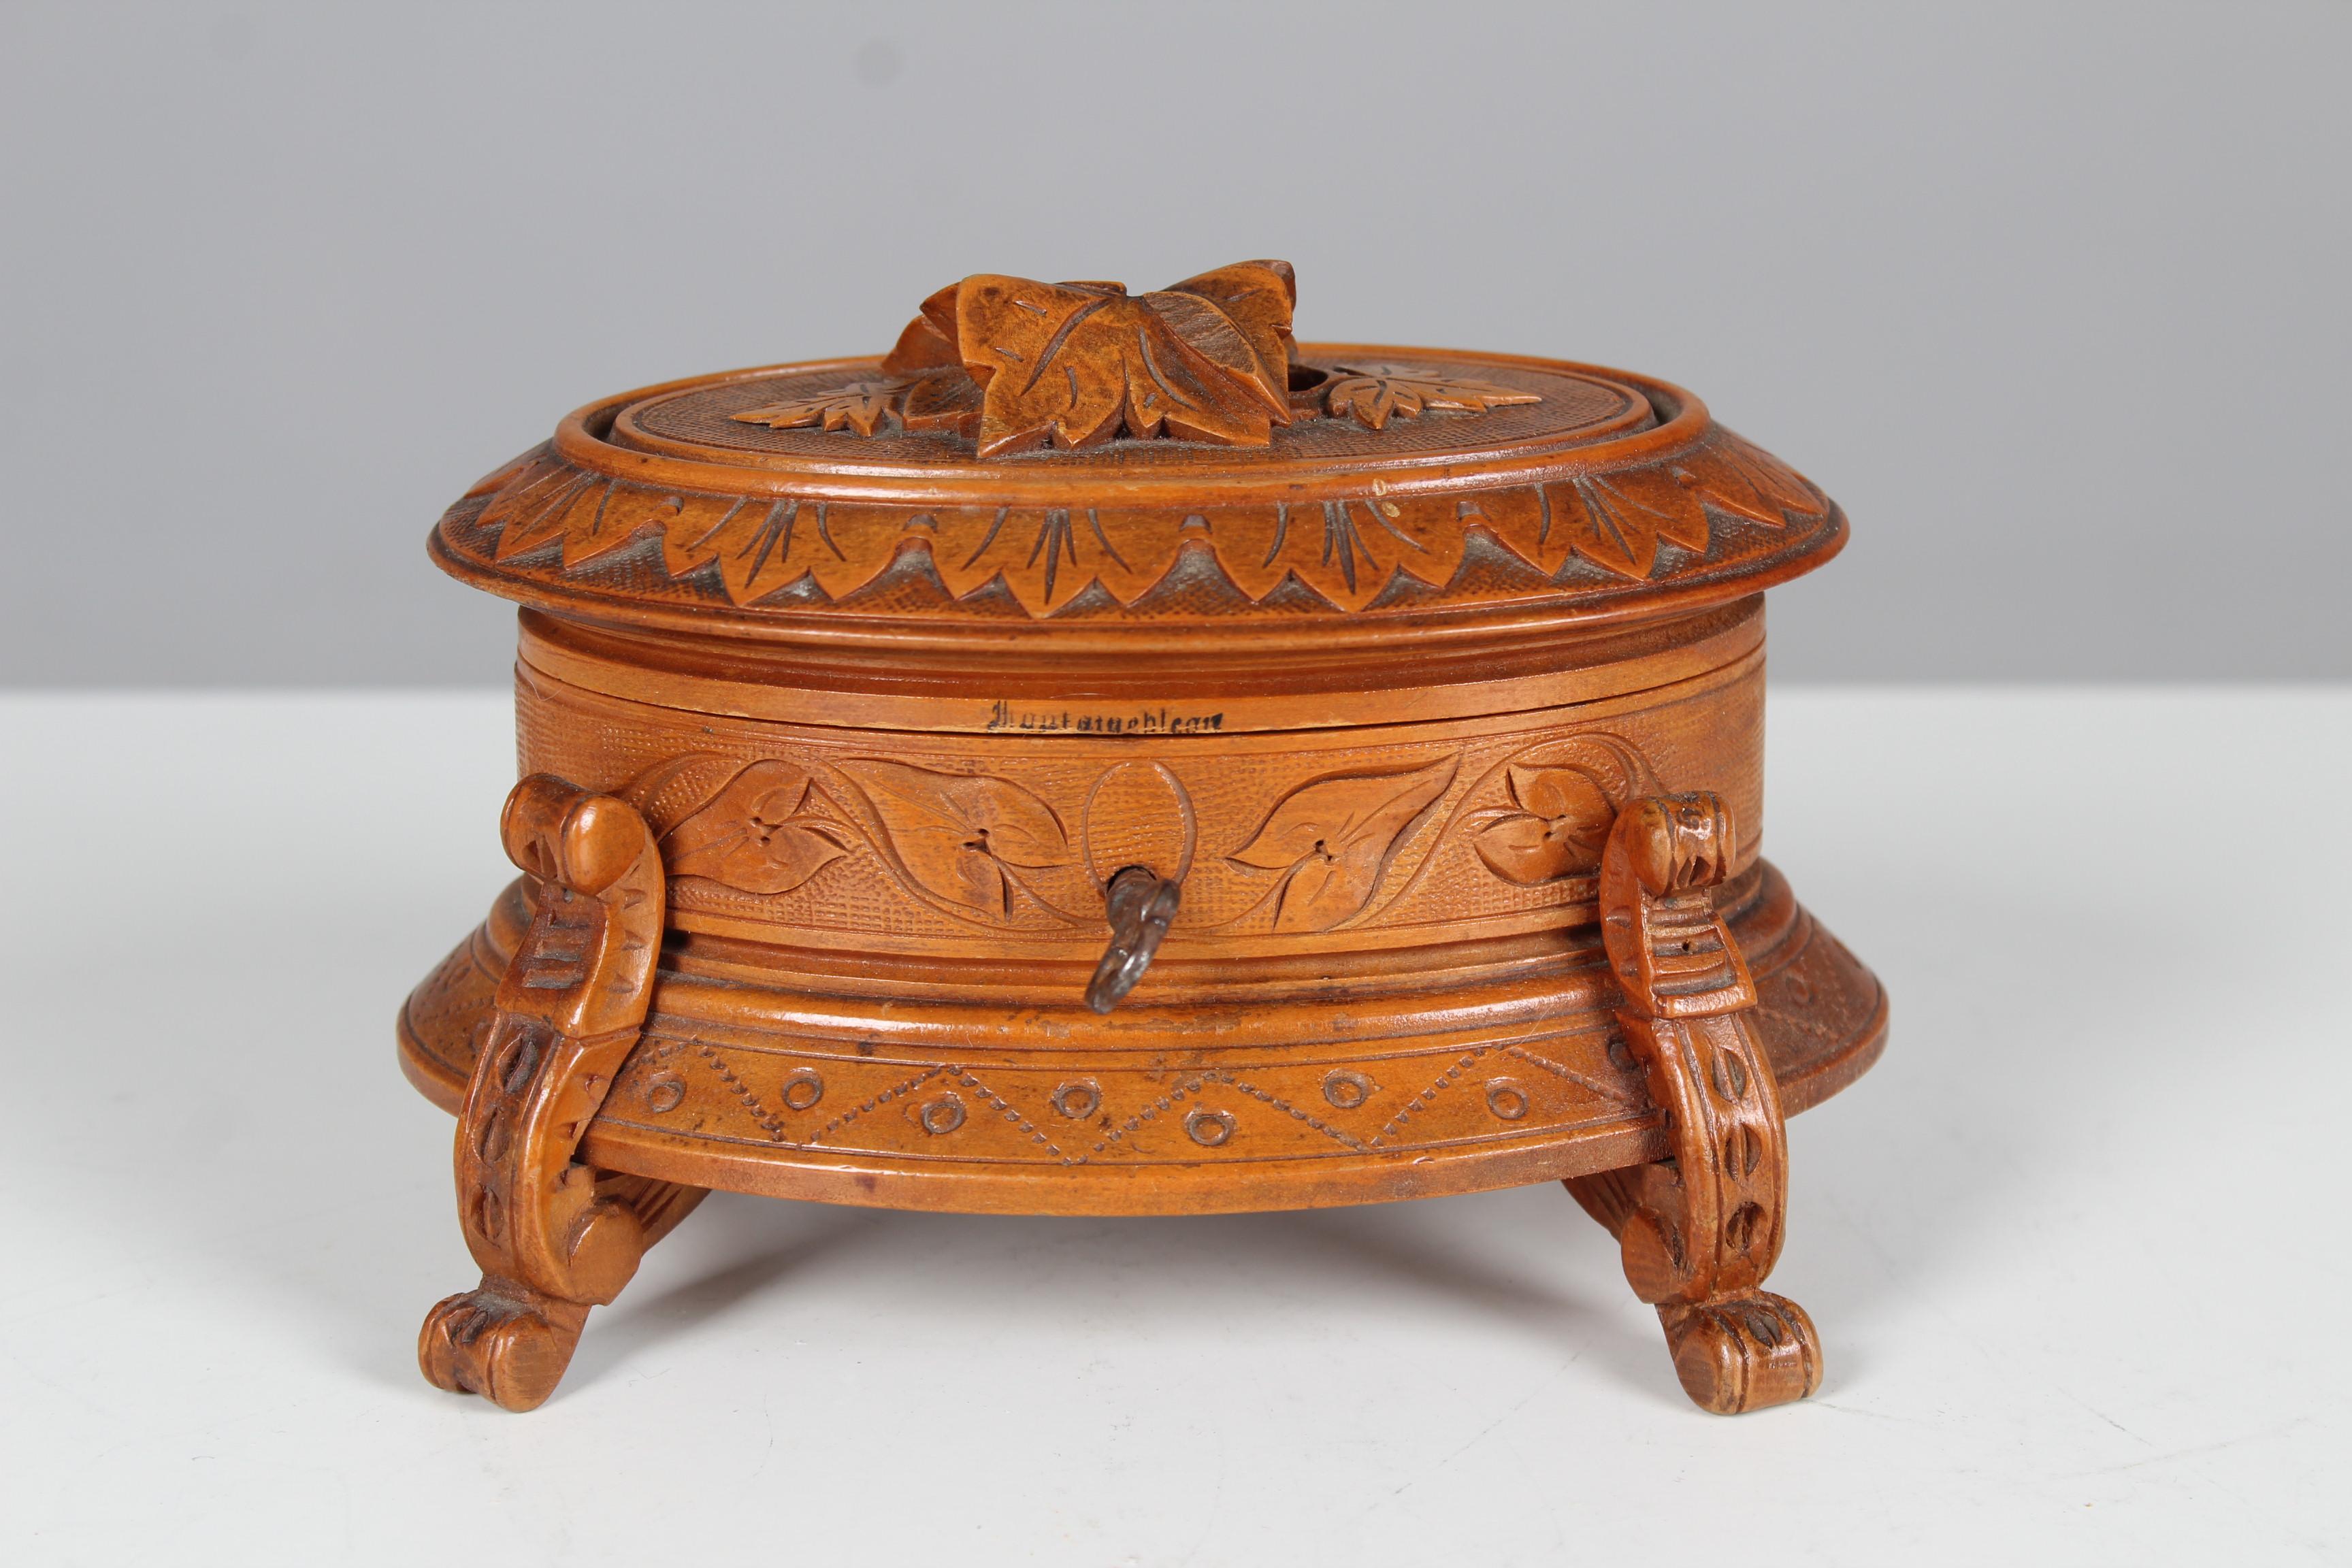 Beautifully carved wooden casket. Interior lined with dark blue velvet.
On the lid are carved oak leaves.
Two handwritten markings 